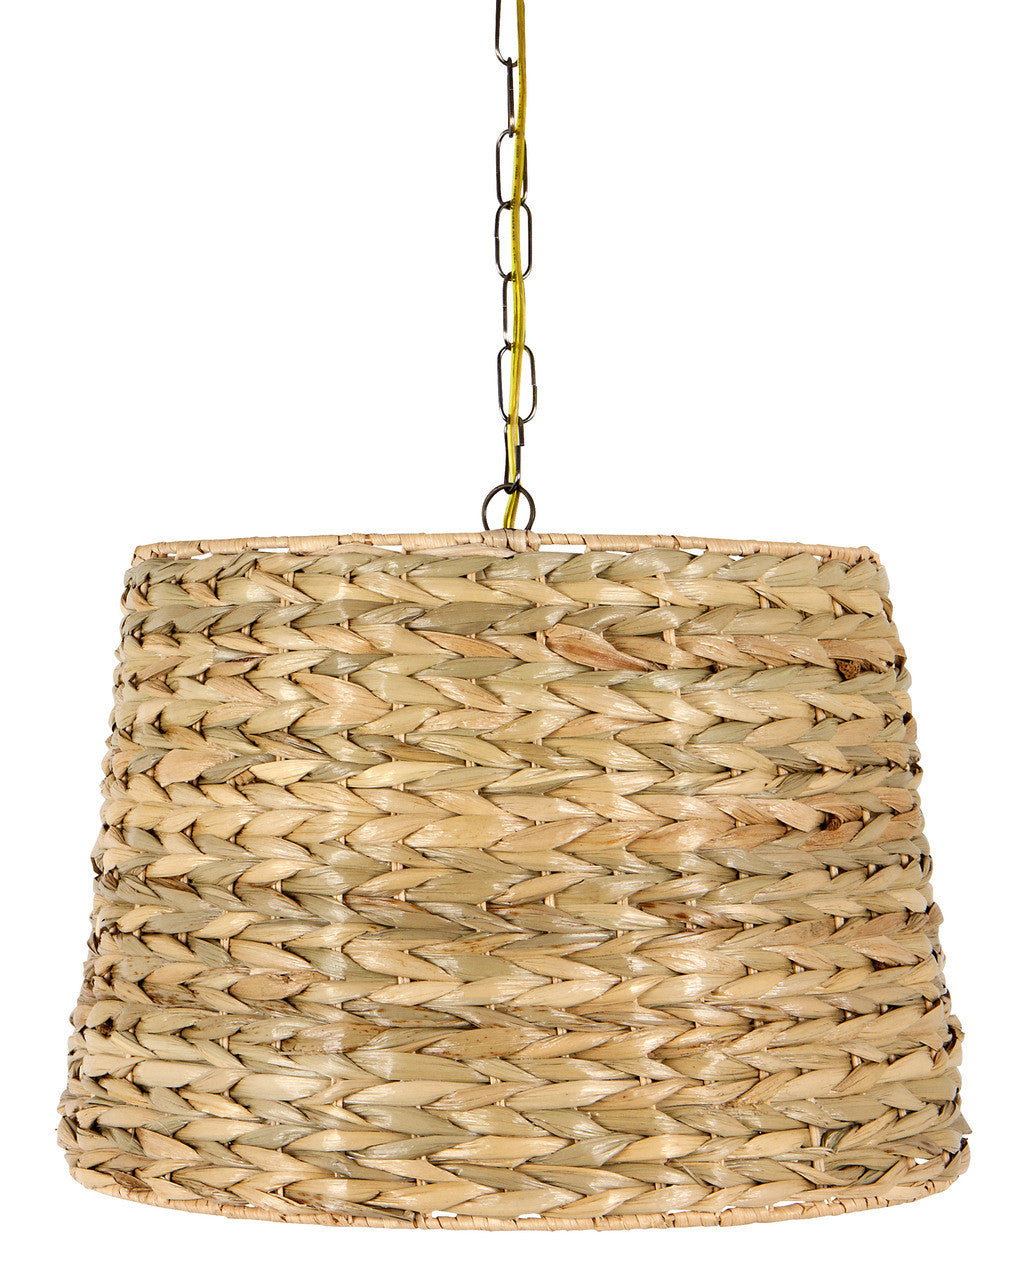 UpgradeLights Woven Seagrass 16 Inch Drum Portable Swag Lampshade